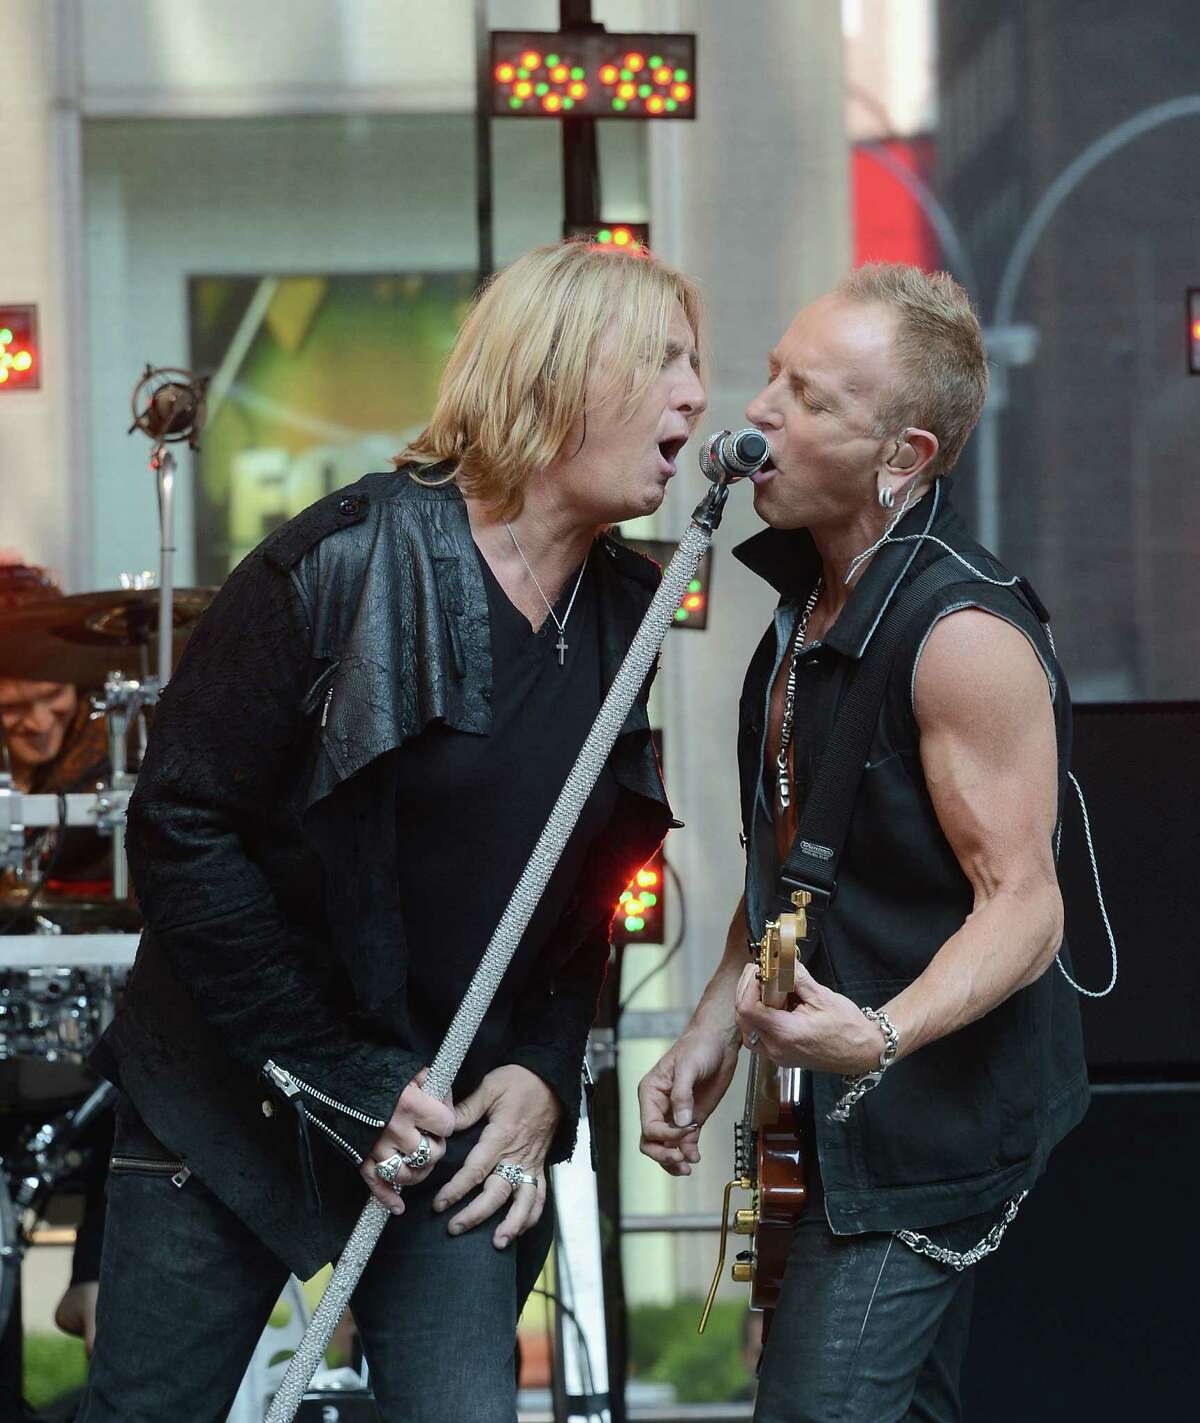 Joe Elliott and Phill Collen of Def Leppard perform during "FOX & Friends" All American Concert Series at FOX Studios on June 15, 2012 in New York City.